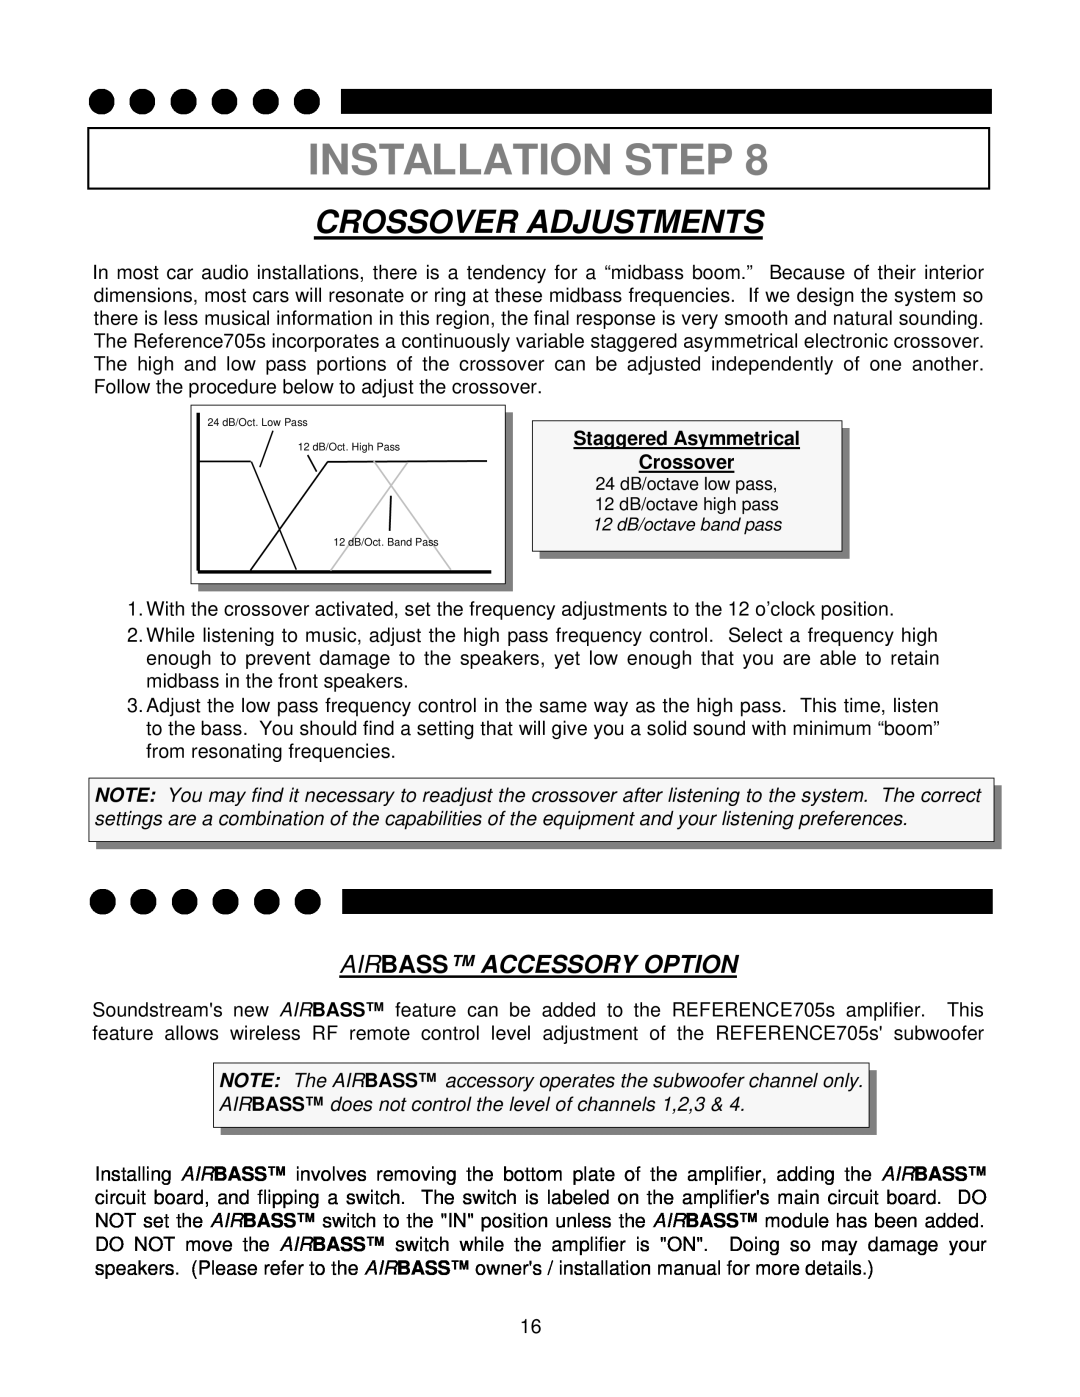 Soundstream Technologies 705s owner manual Crossover Adjustments, Airbass Accessory Option, Installation Step 